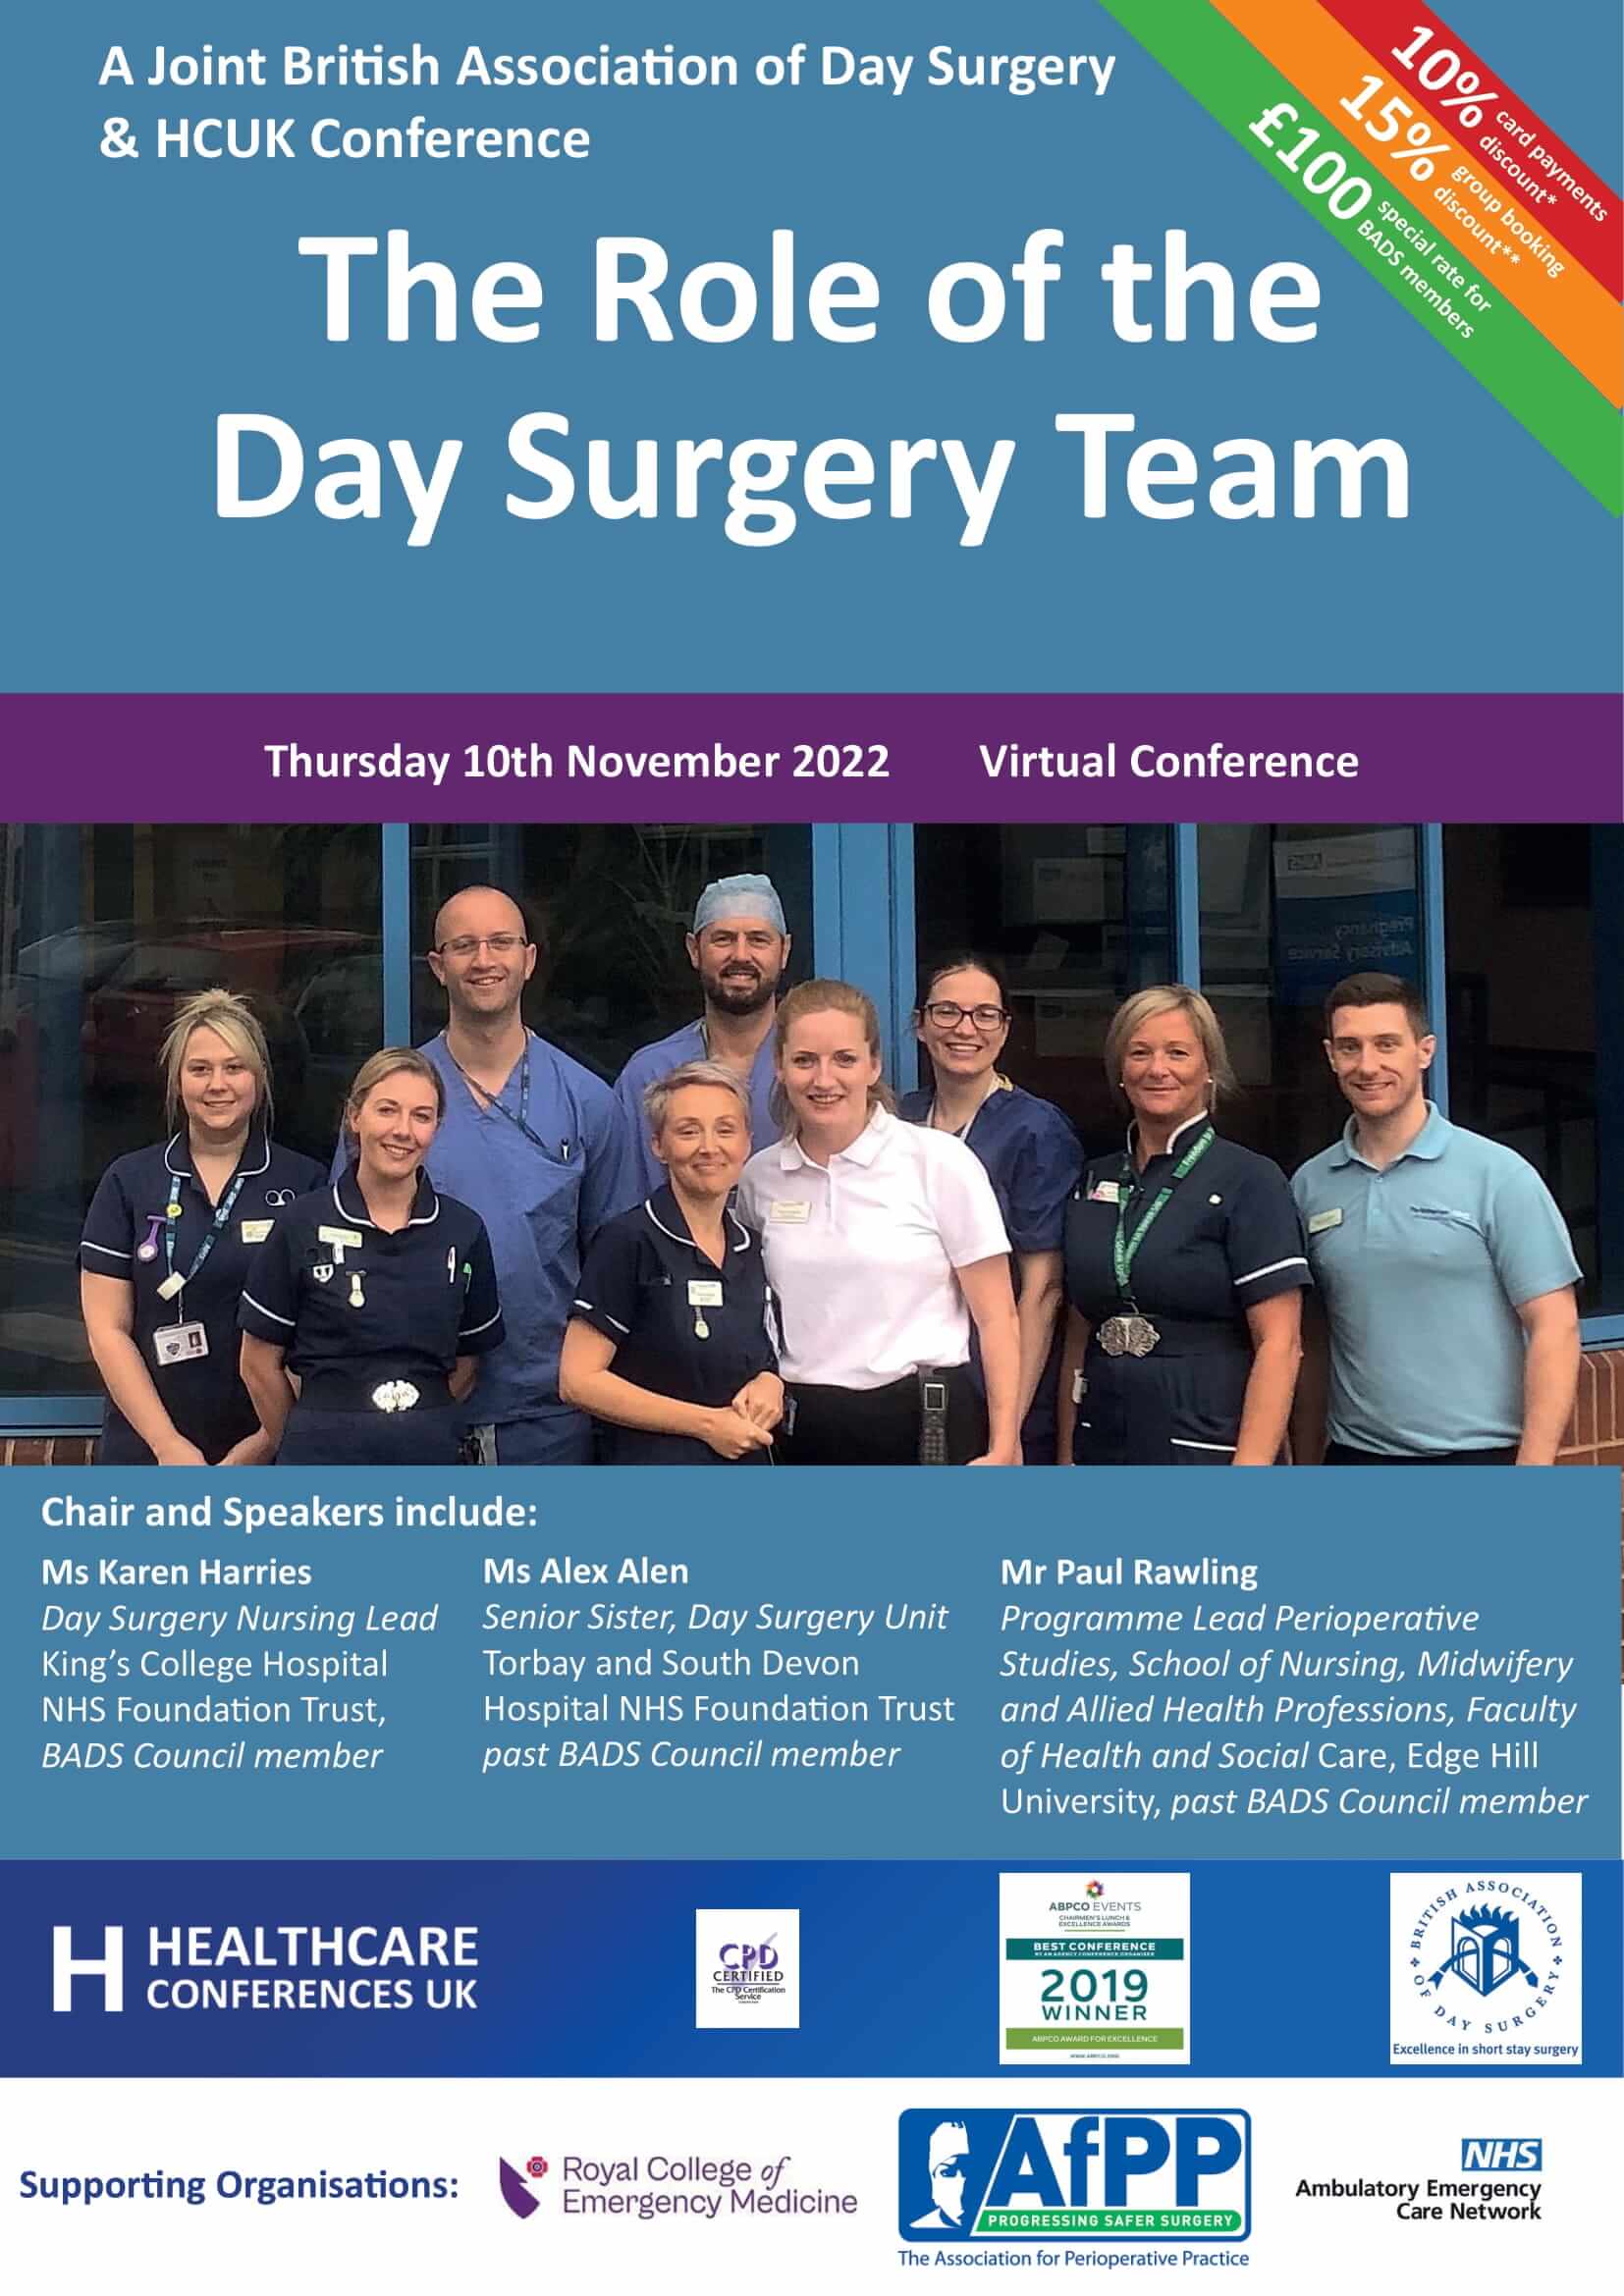 The Role of the Day Surgery Team